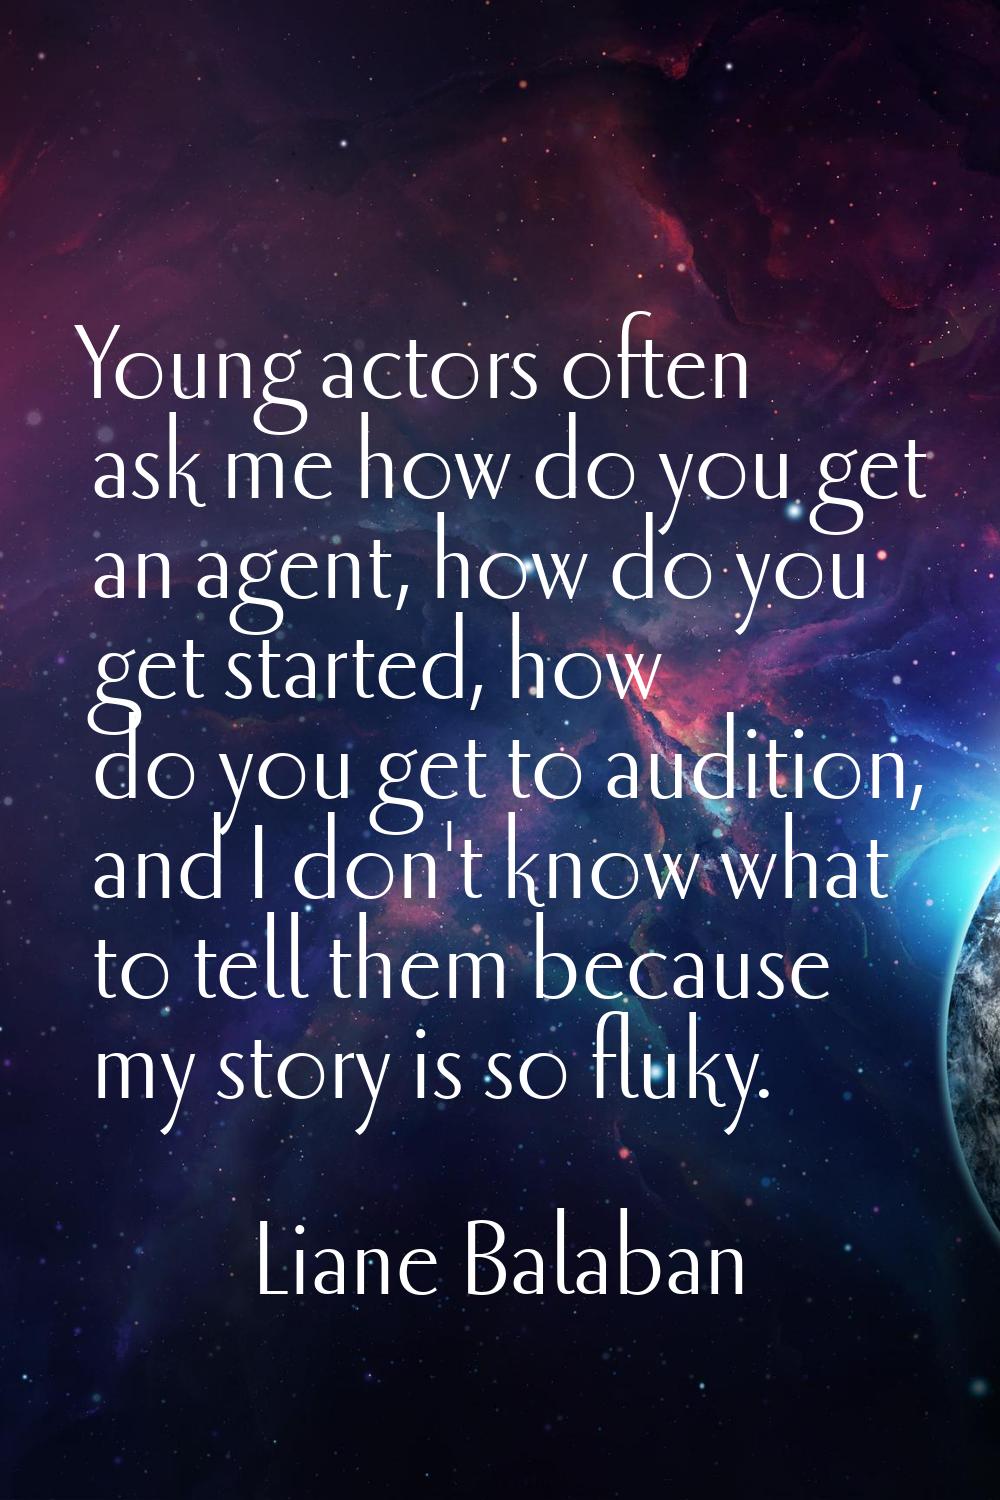 Young actors often ask me how do you get an agent, how do you get started, how do you get to auditi